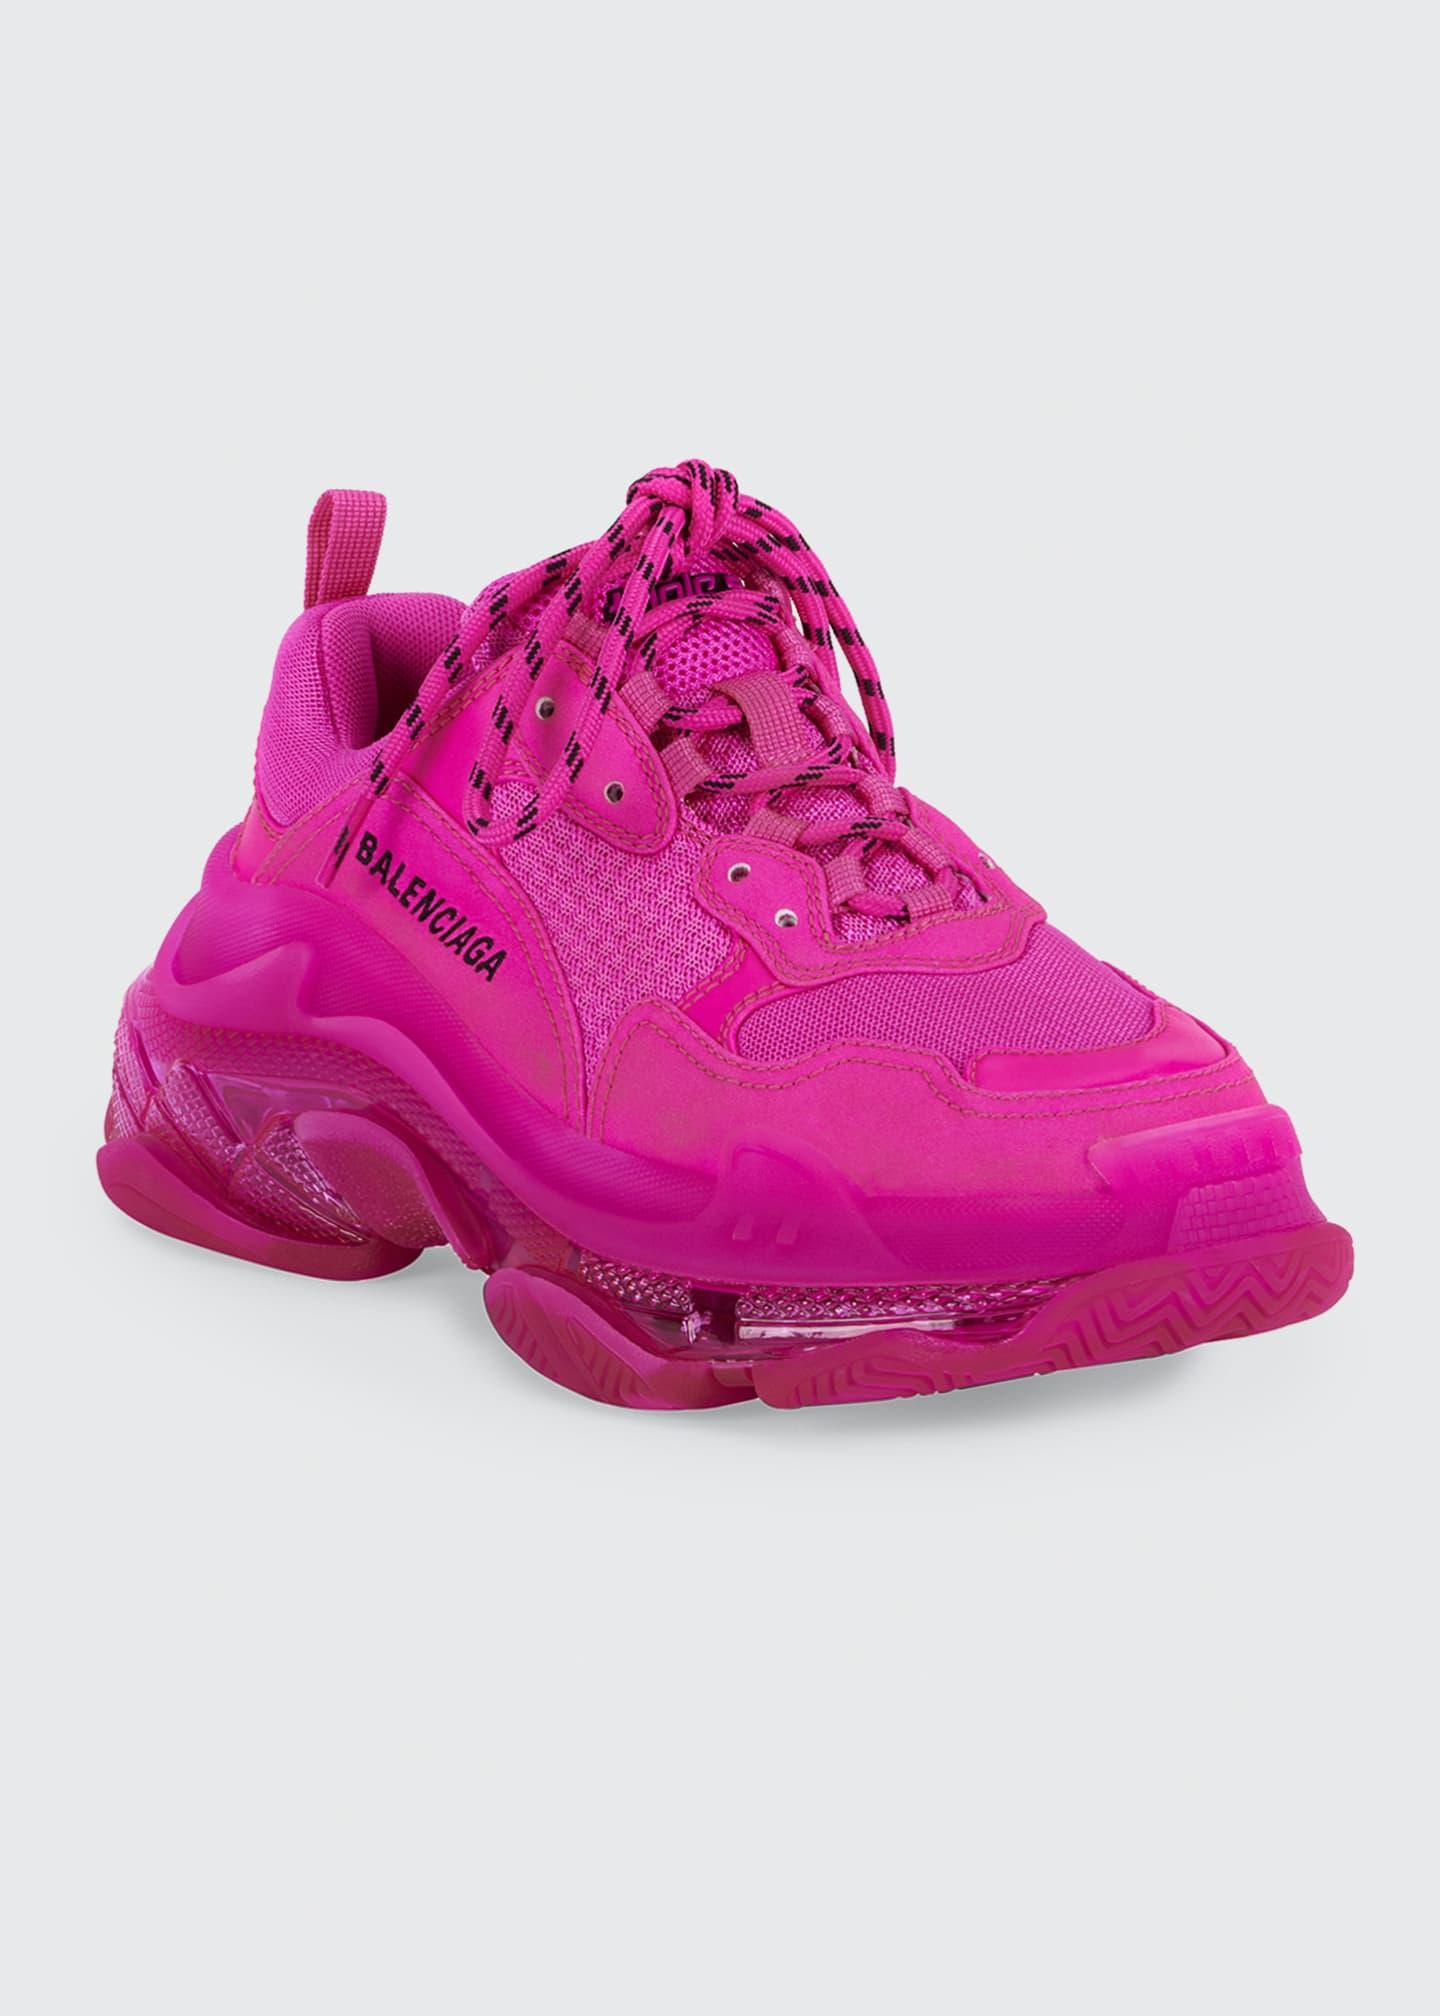 Balenciaga Synthetic Triple S Neon Trainer Sneakers in Pink - Lyst